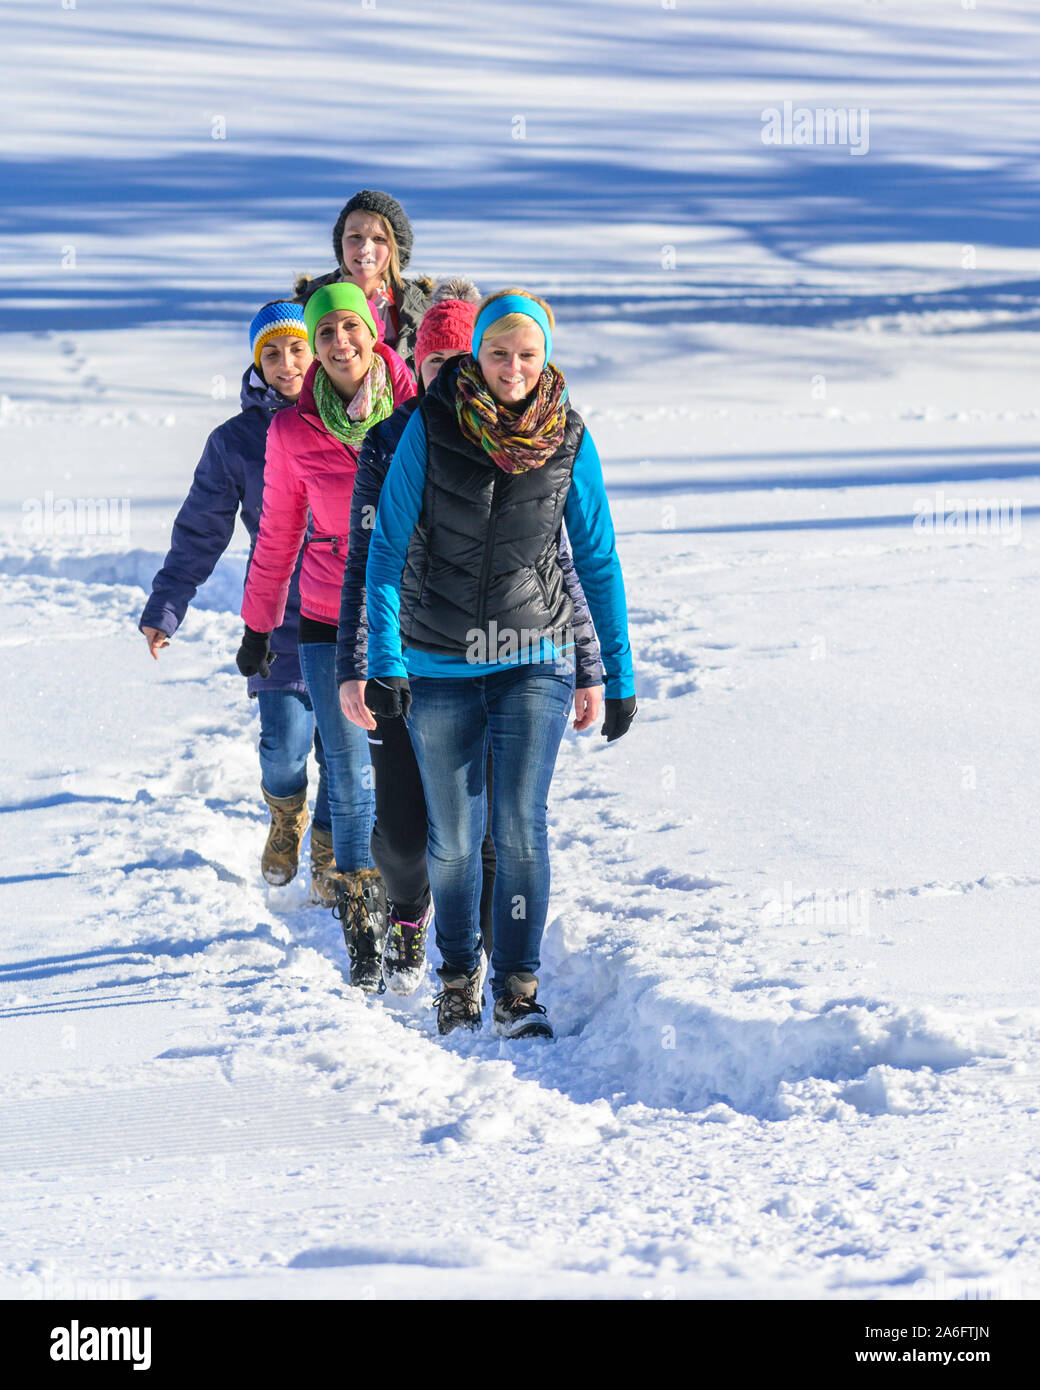 A group of young women doing a winterwalk at a sunny day in austrian alps Stock Photo